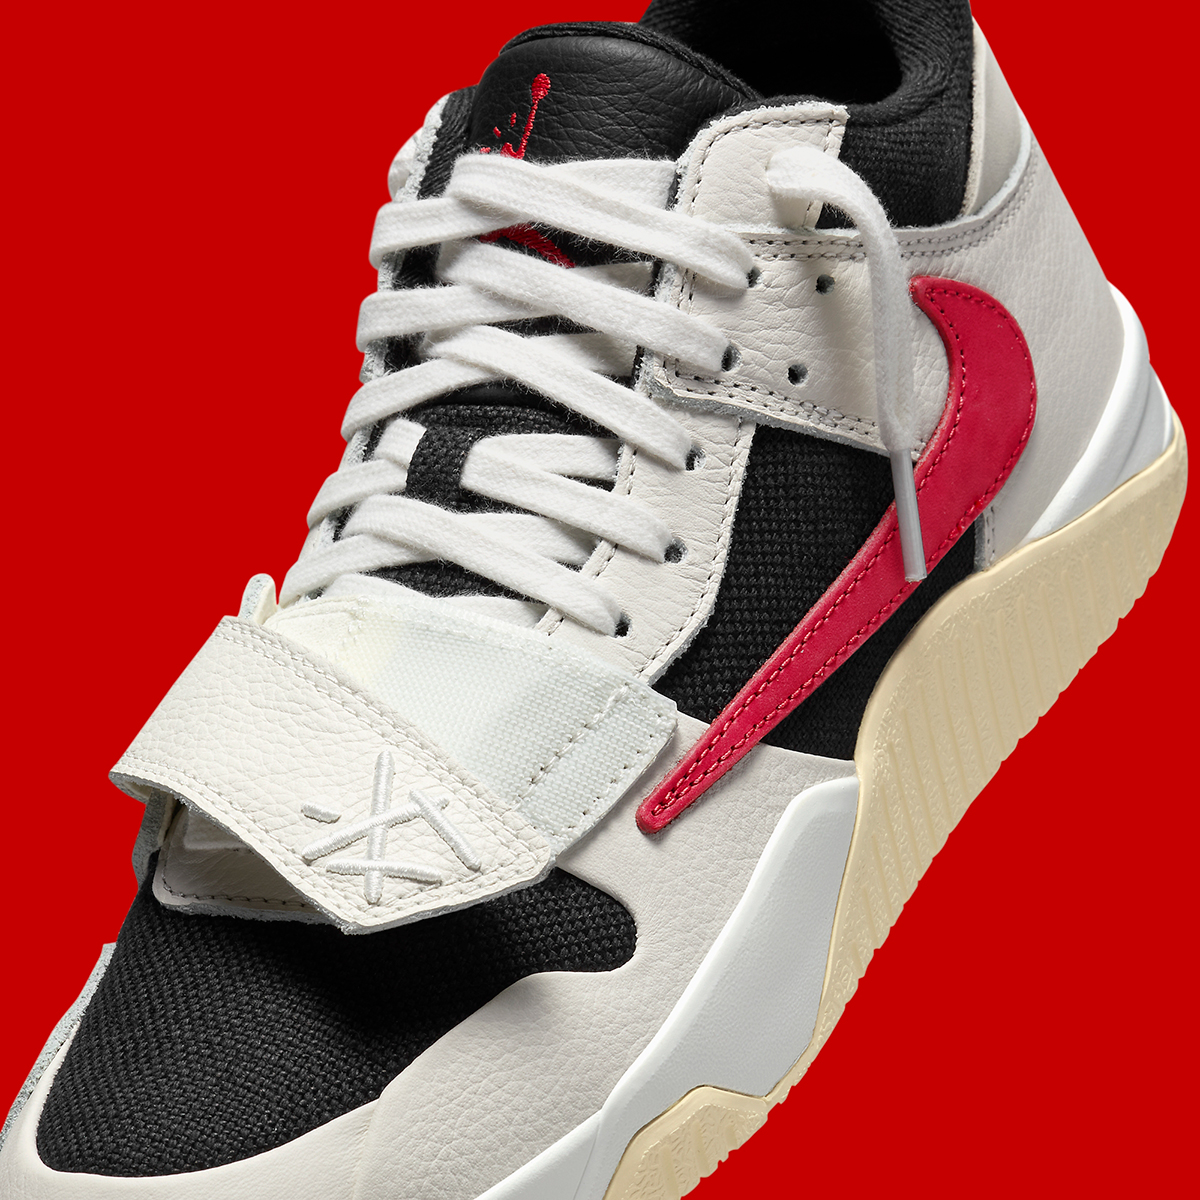 Travis Scott Dropping this weekend is a brand new Jordan retro for the grade schoolers Tr Sail University Red Black Muslin Fz8117 101 4